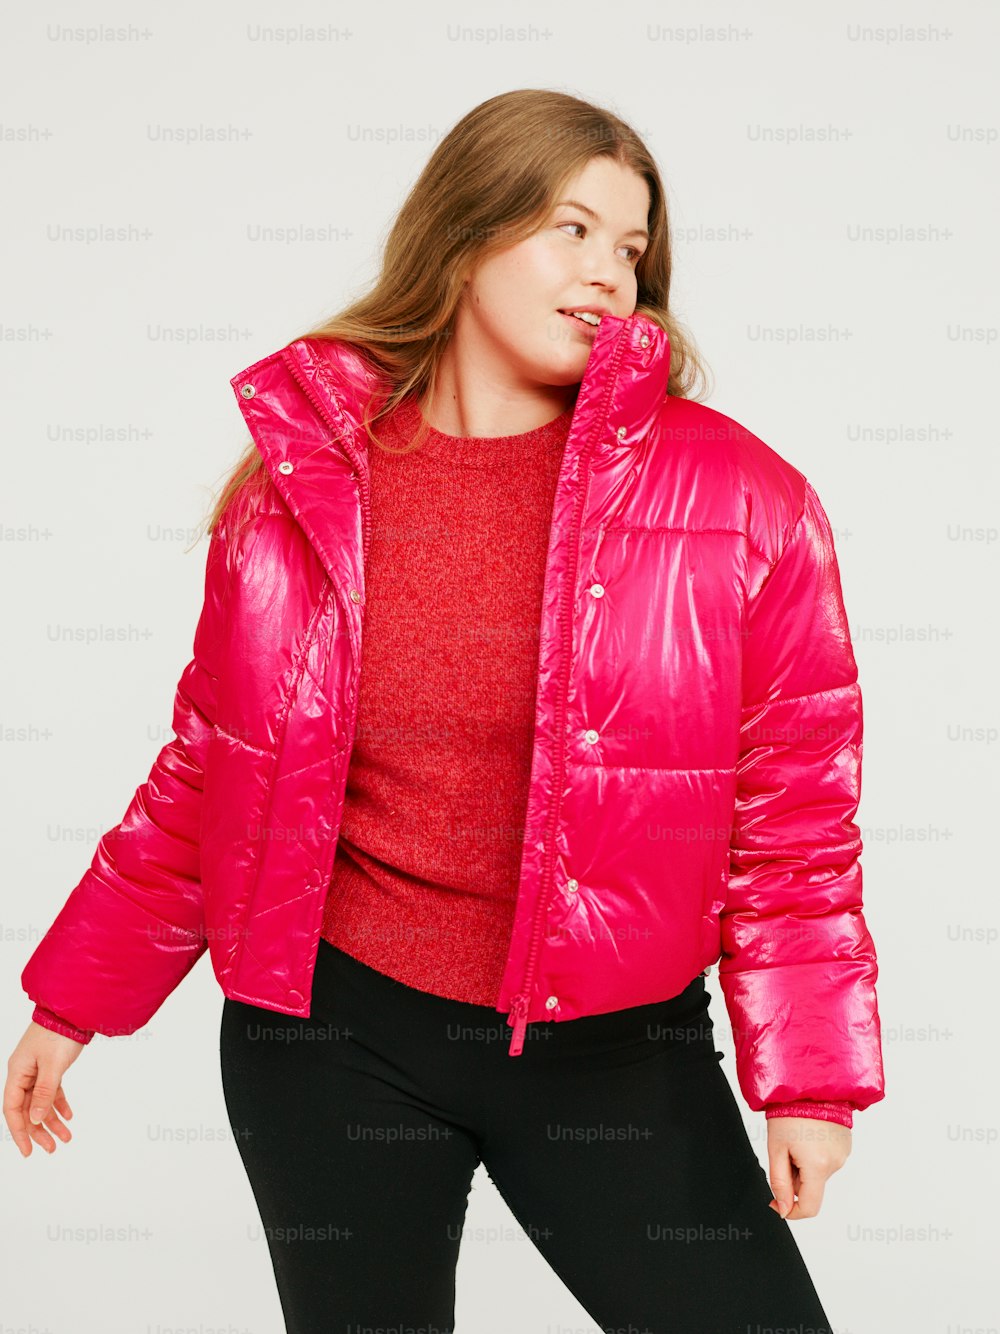 a woman wearing a bright pink jacket and black pants